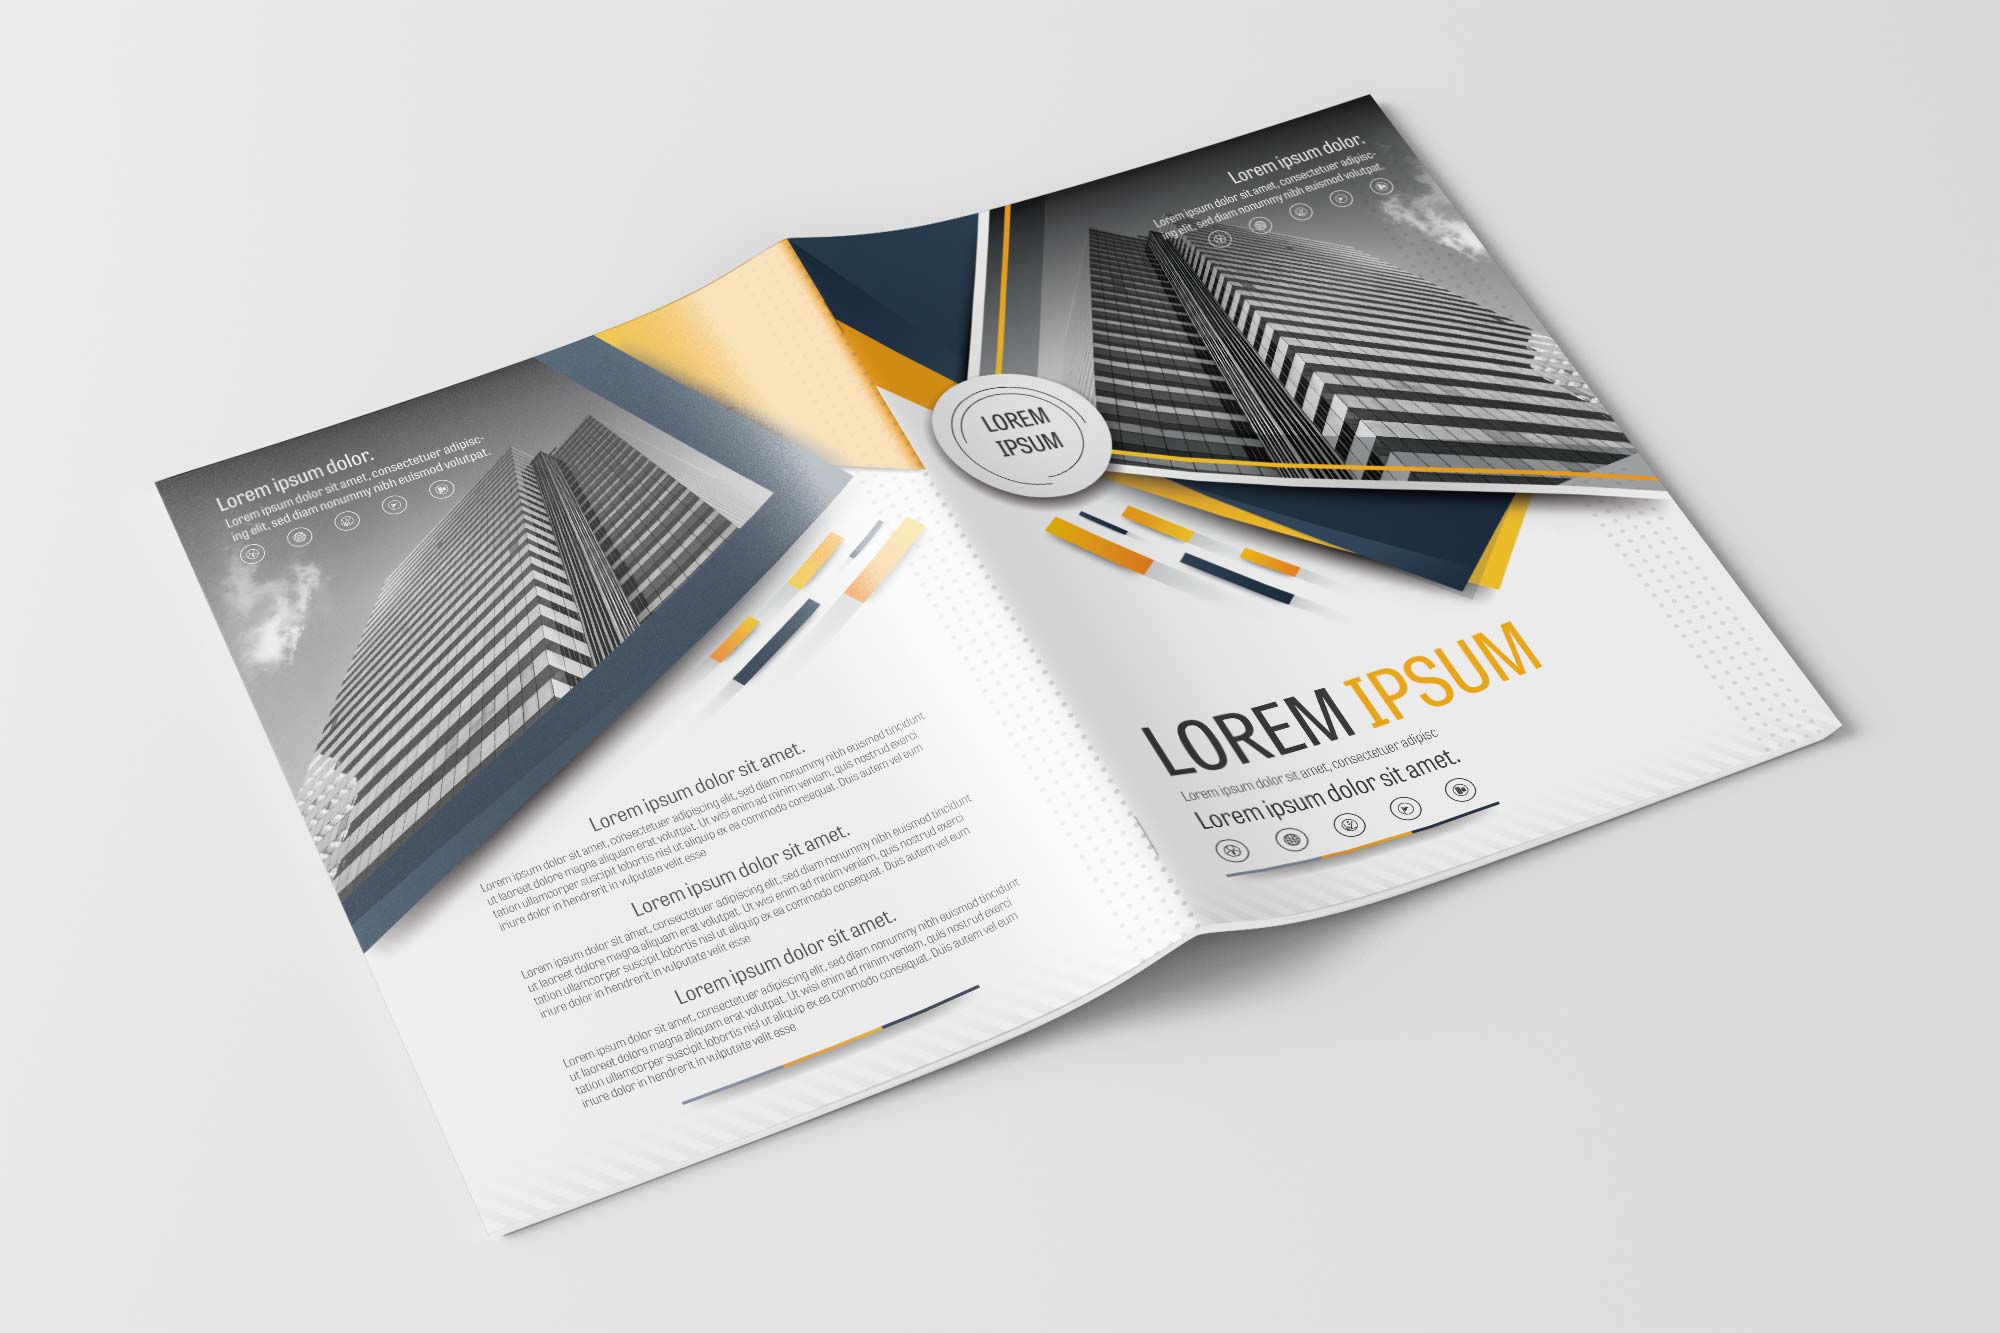 Free Vector Company Brochure Design Template with Gray and Yellow